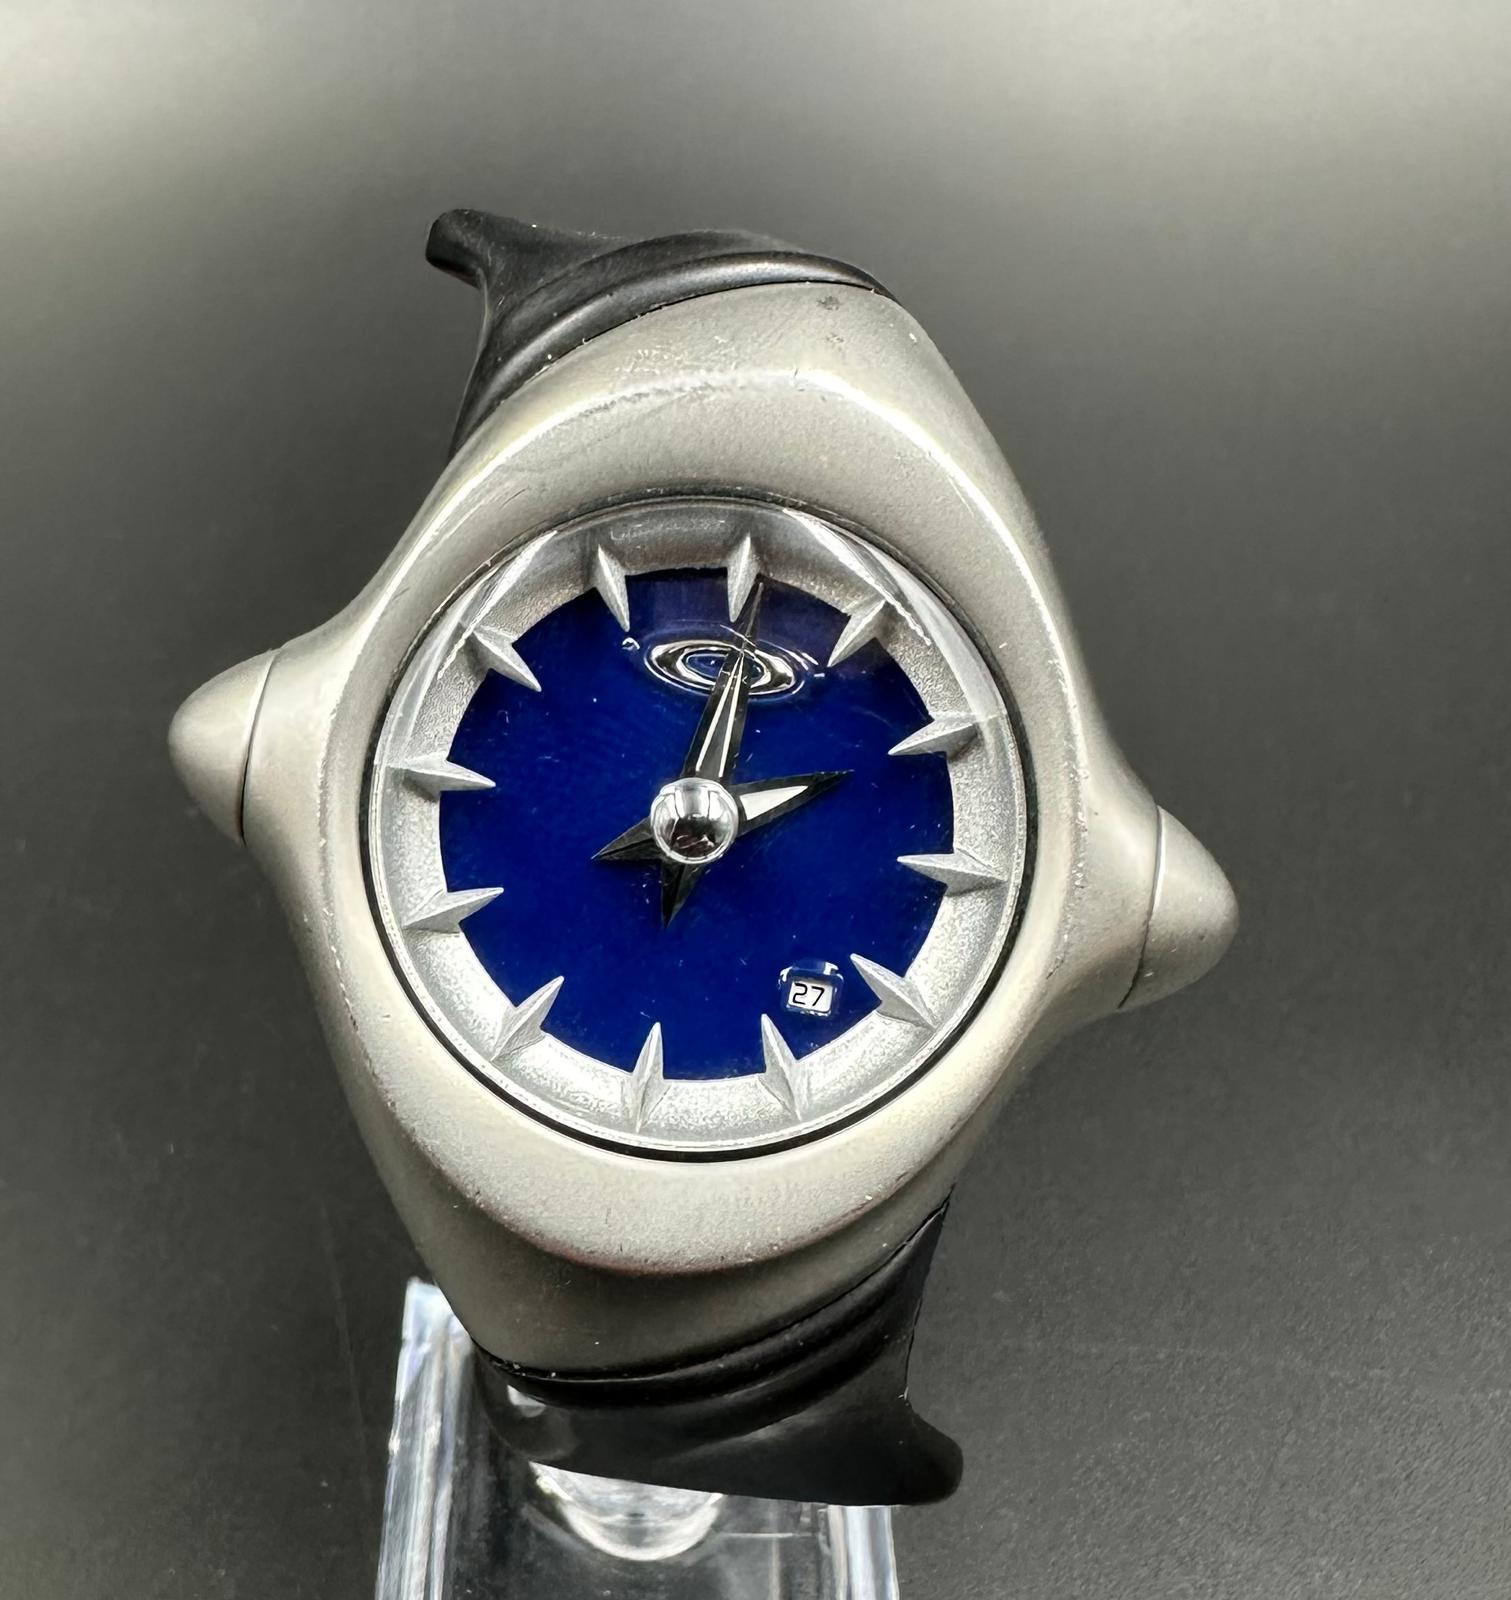 A gentleman's Oakley wrist watch with a black rubber strap and blue enamel face - Image 2 of 4